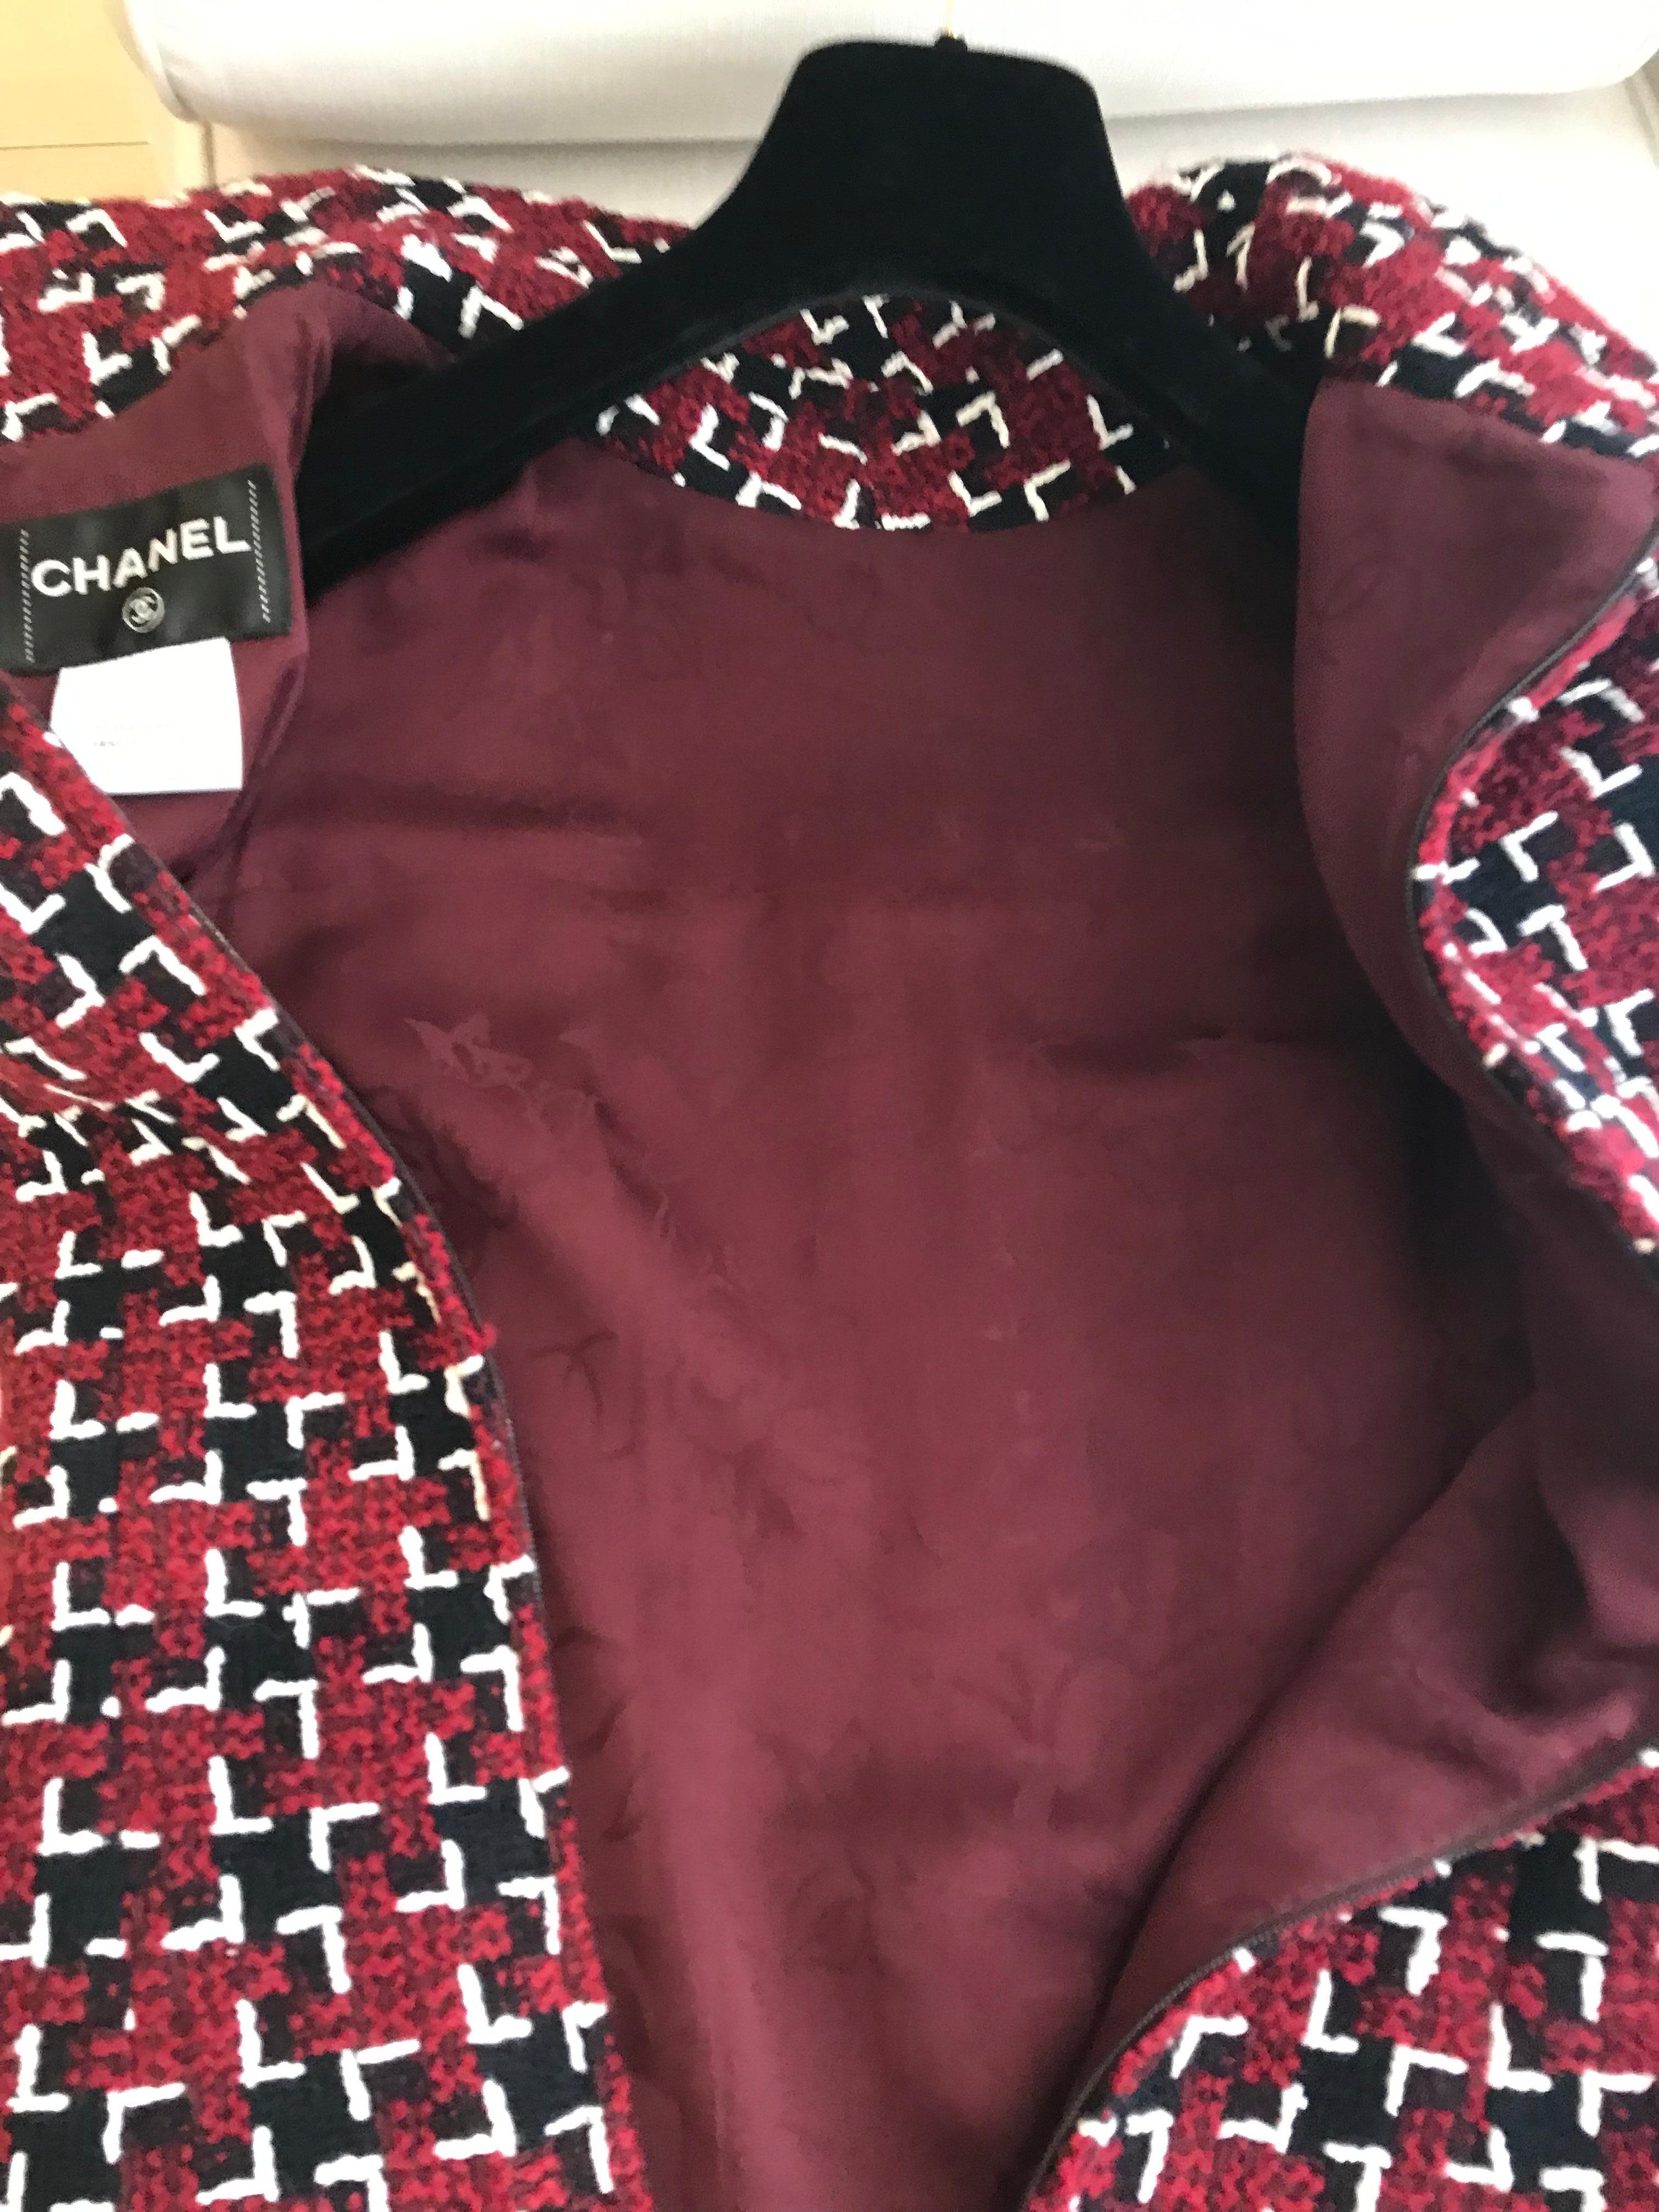 Chanel Cocktail Tweed Dress in Burgundy, Black and White New with tag 7